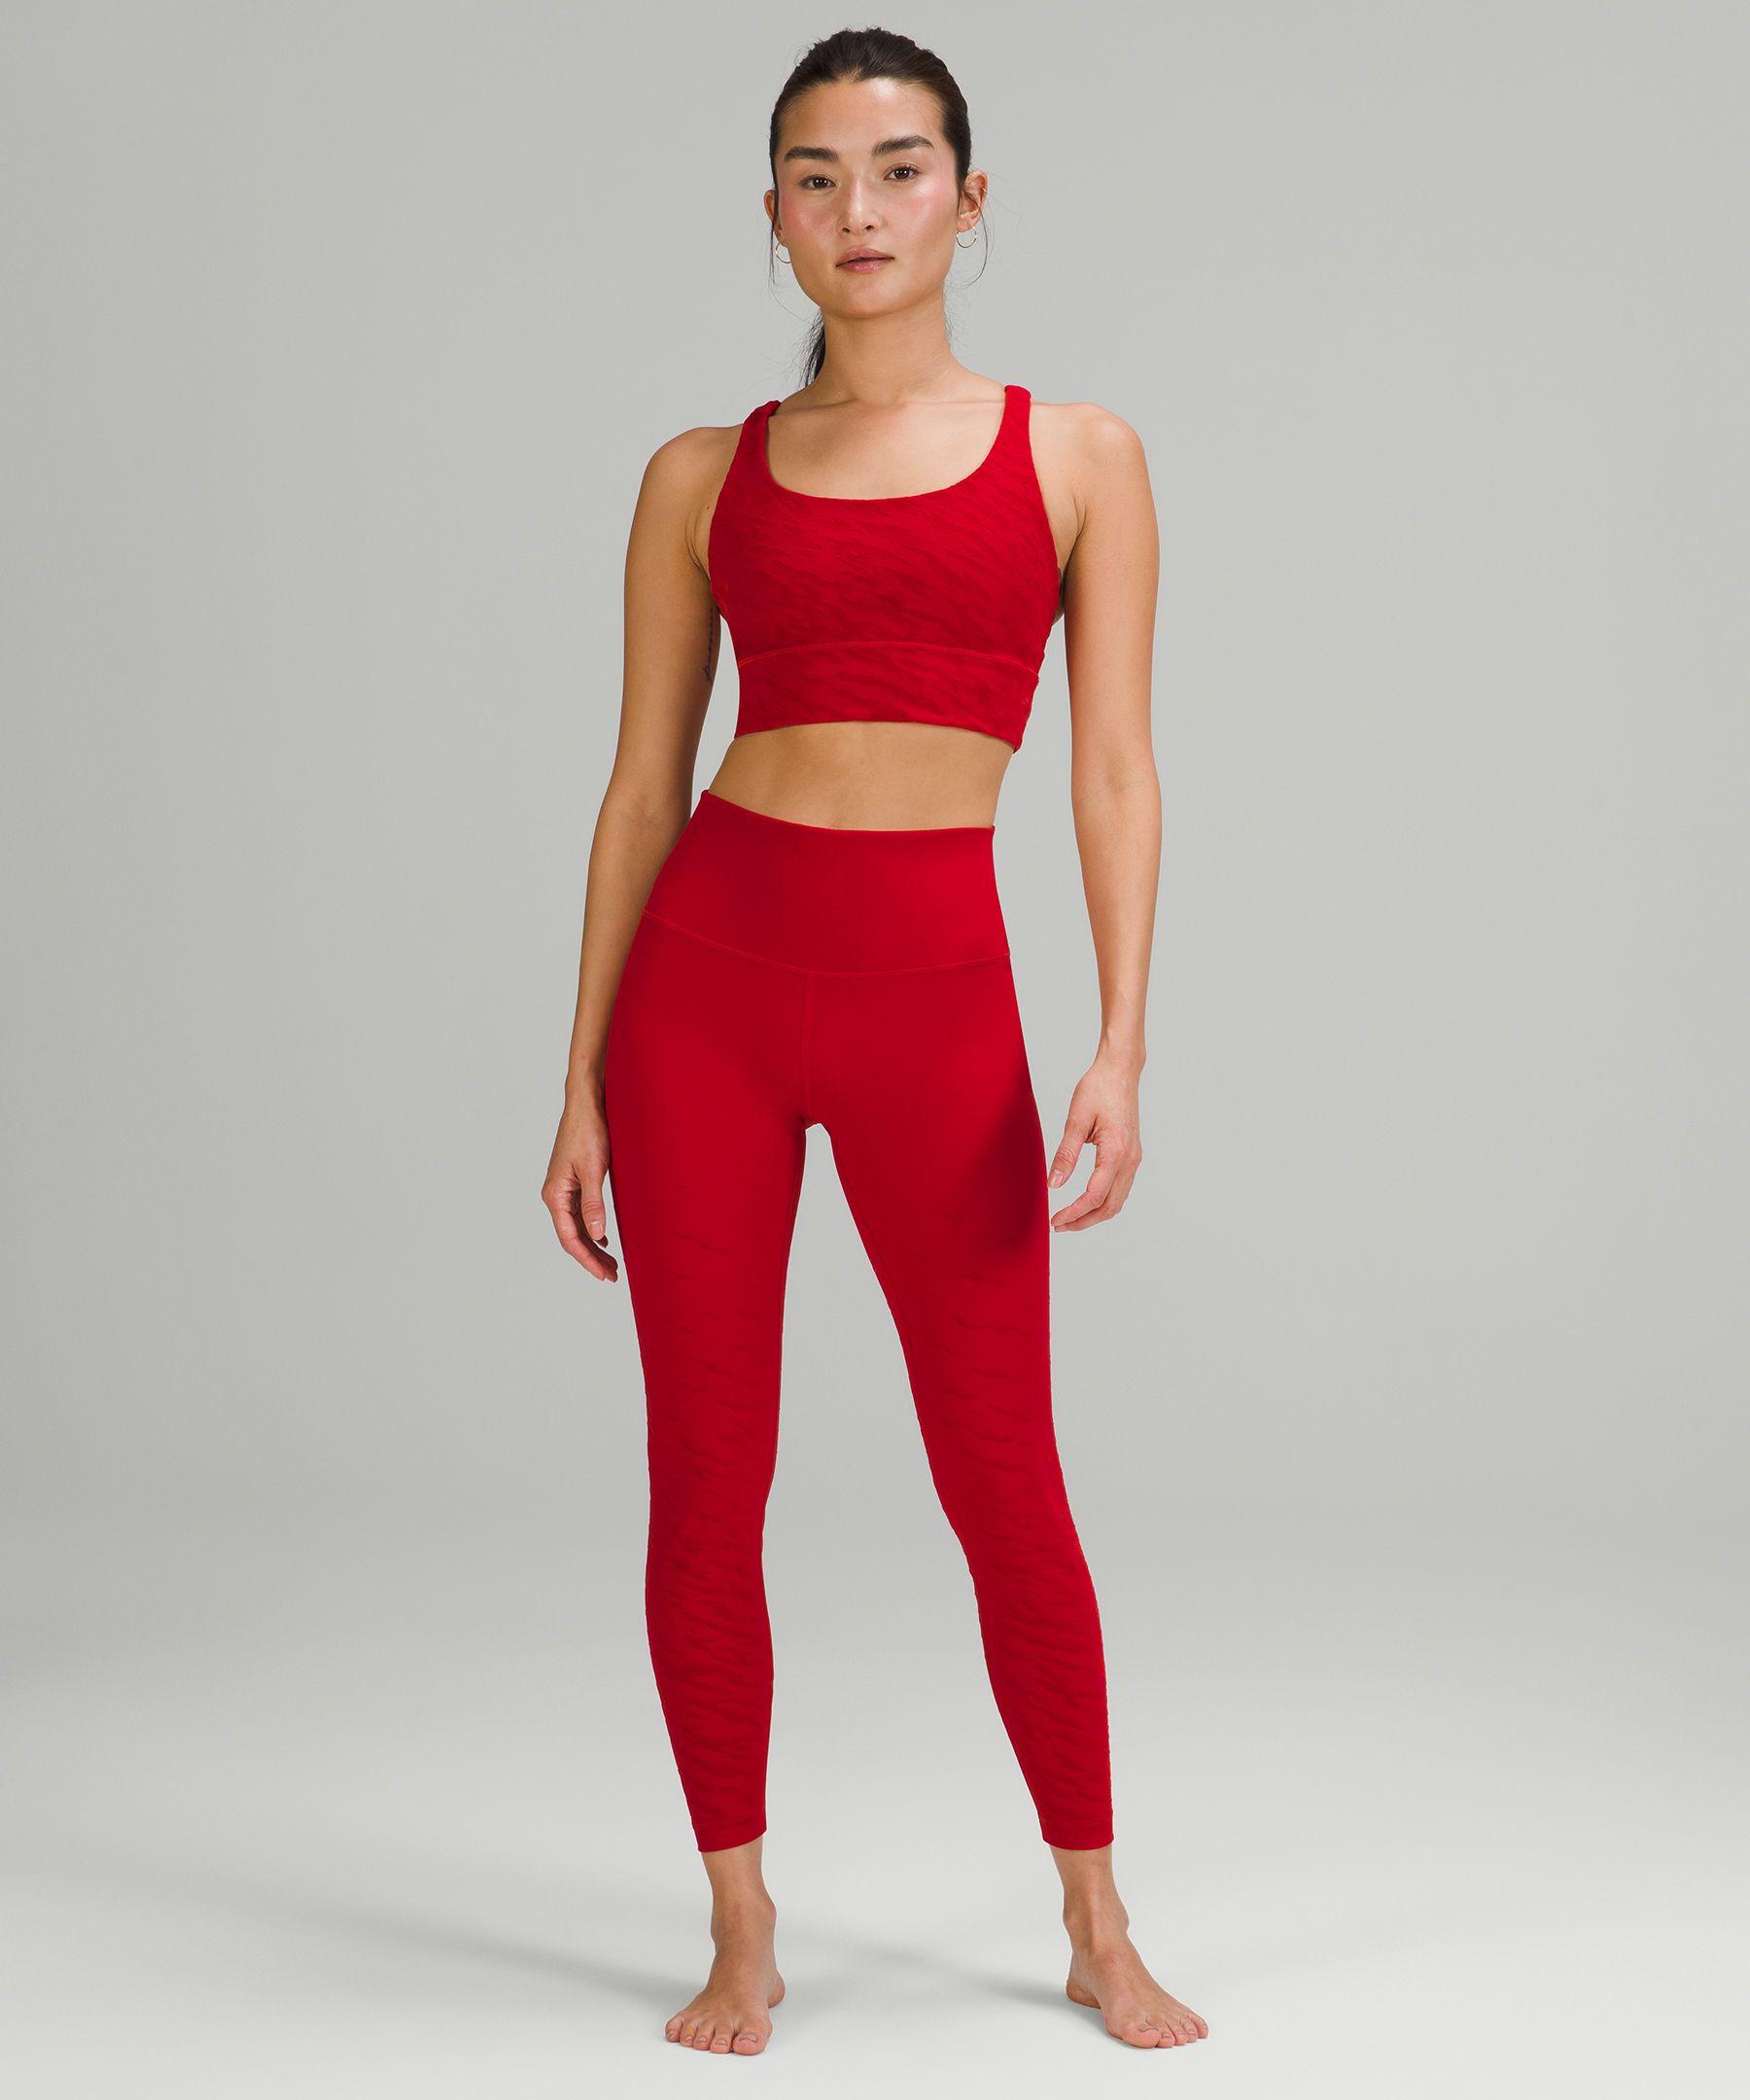 lululemon athletica Lunar New Year Wunder Under High-rise Tight 25 in Red